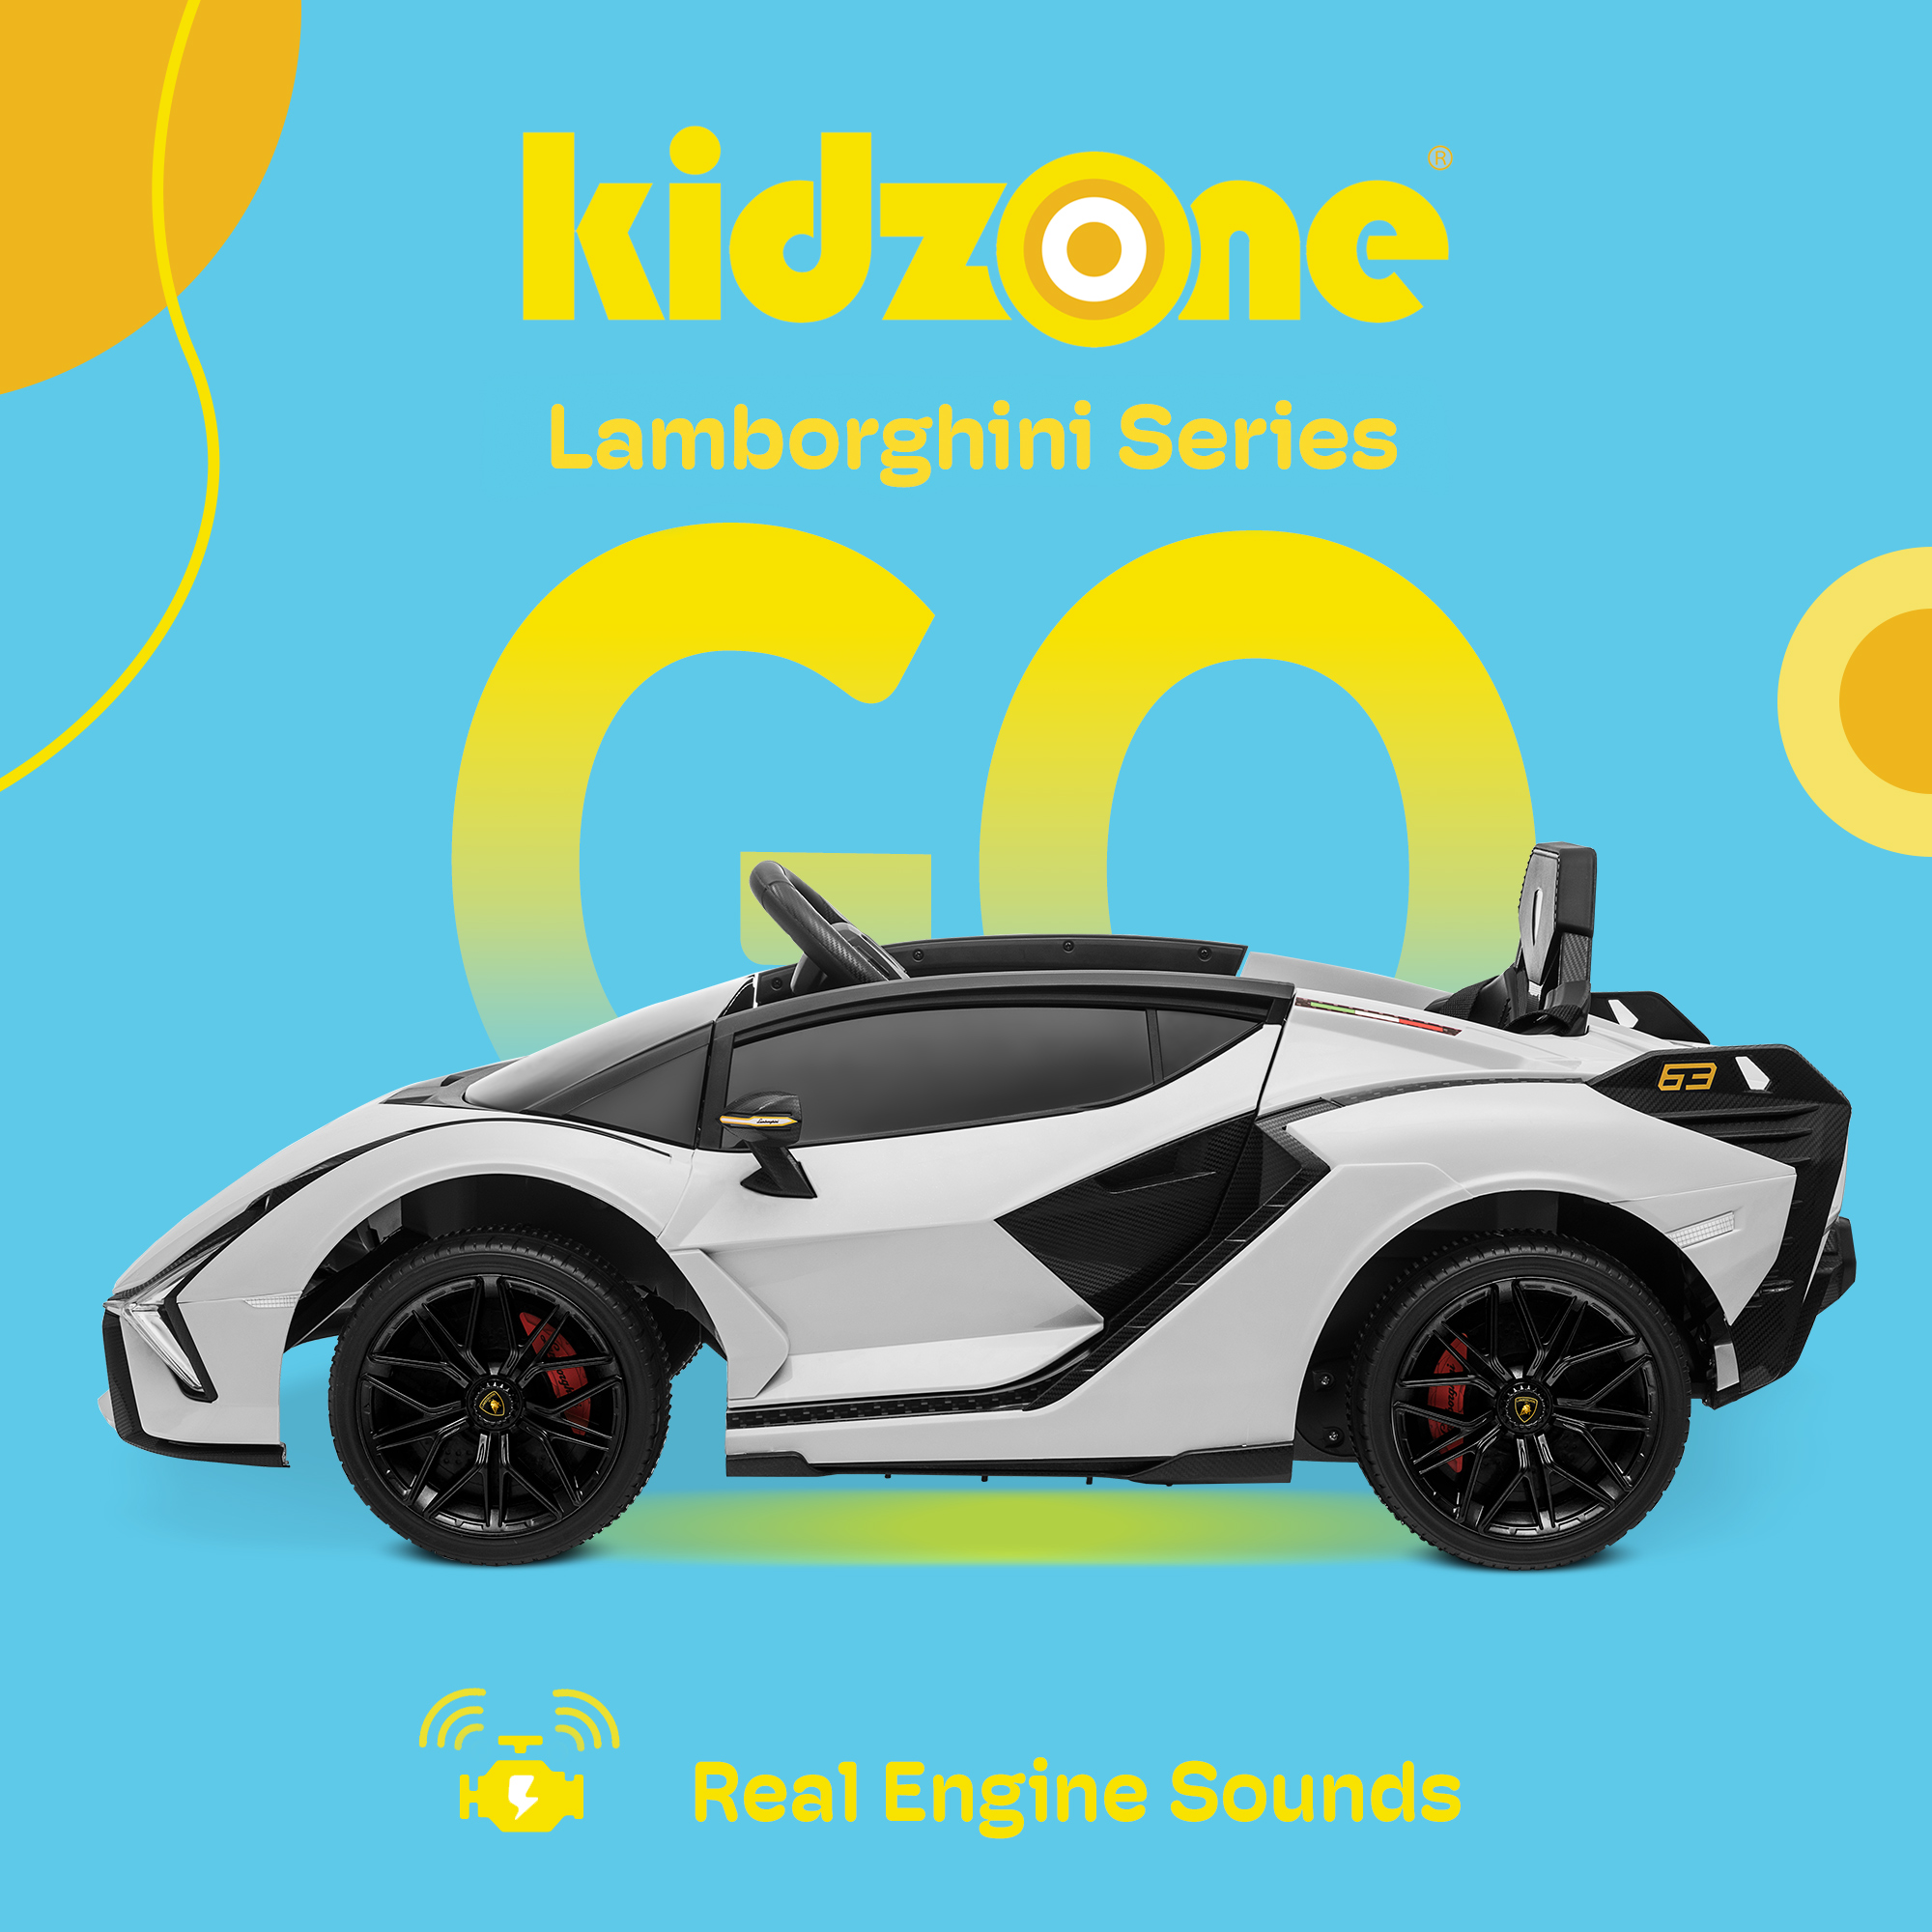 Kidzone Kids 12V Electric Ride On Licensed Lamborghini Sian Roadster Motorized Sport Vehicle With 2 Speed, Remote Control, Wheels Suspension, LED lights, USB/Bluetooth Music, Engine Sounds, White - image 2 of 6